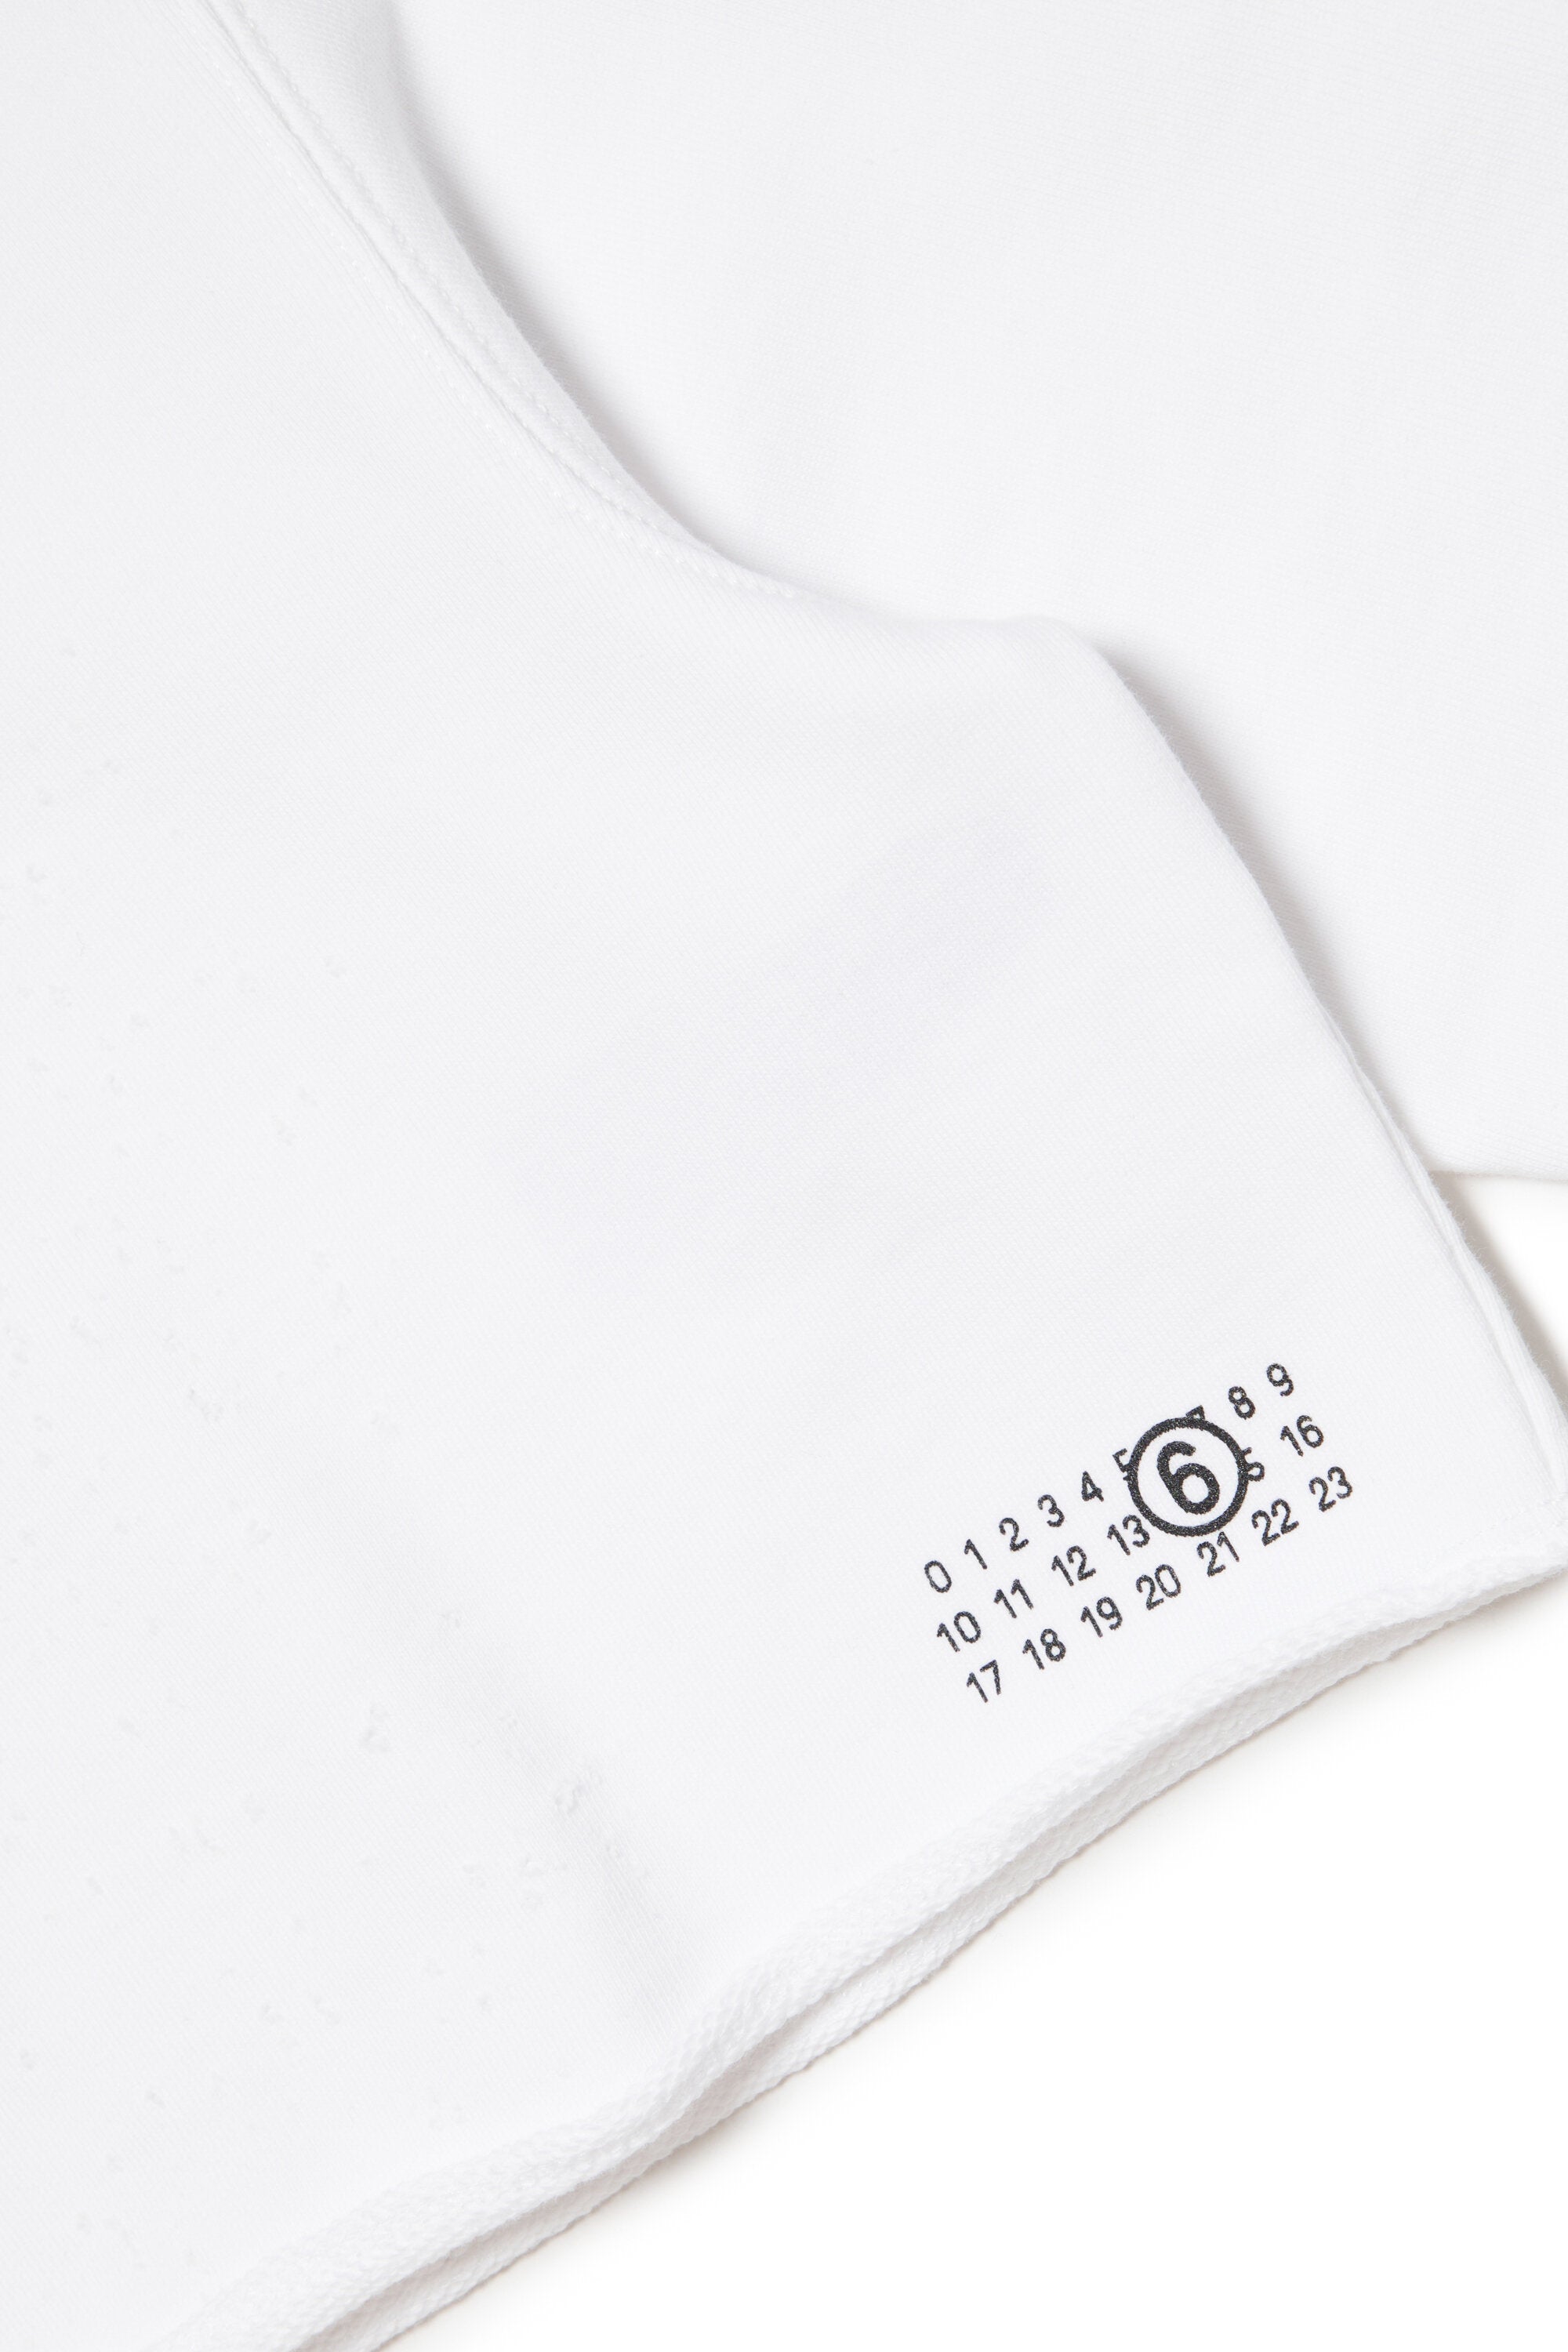 Cropped ripped sweatshirt branded with numeric logo